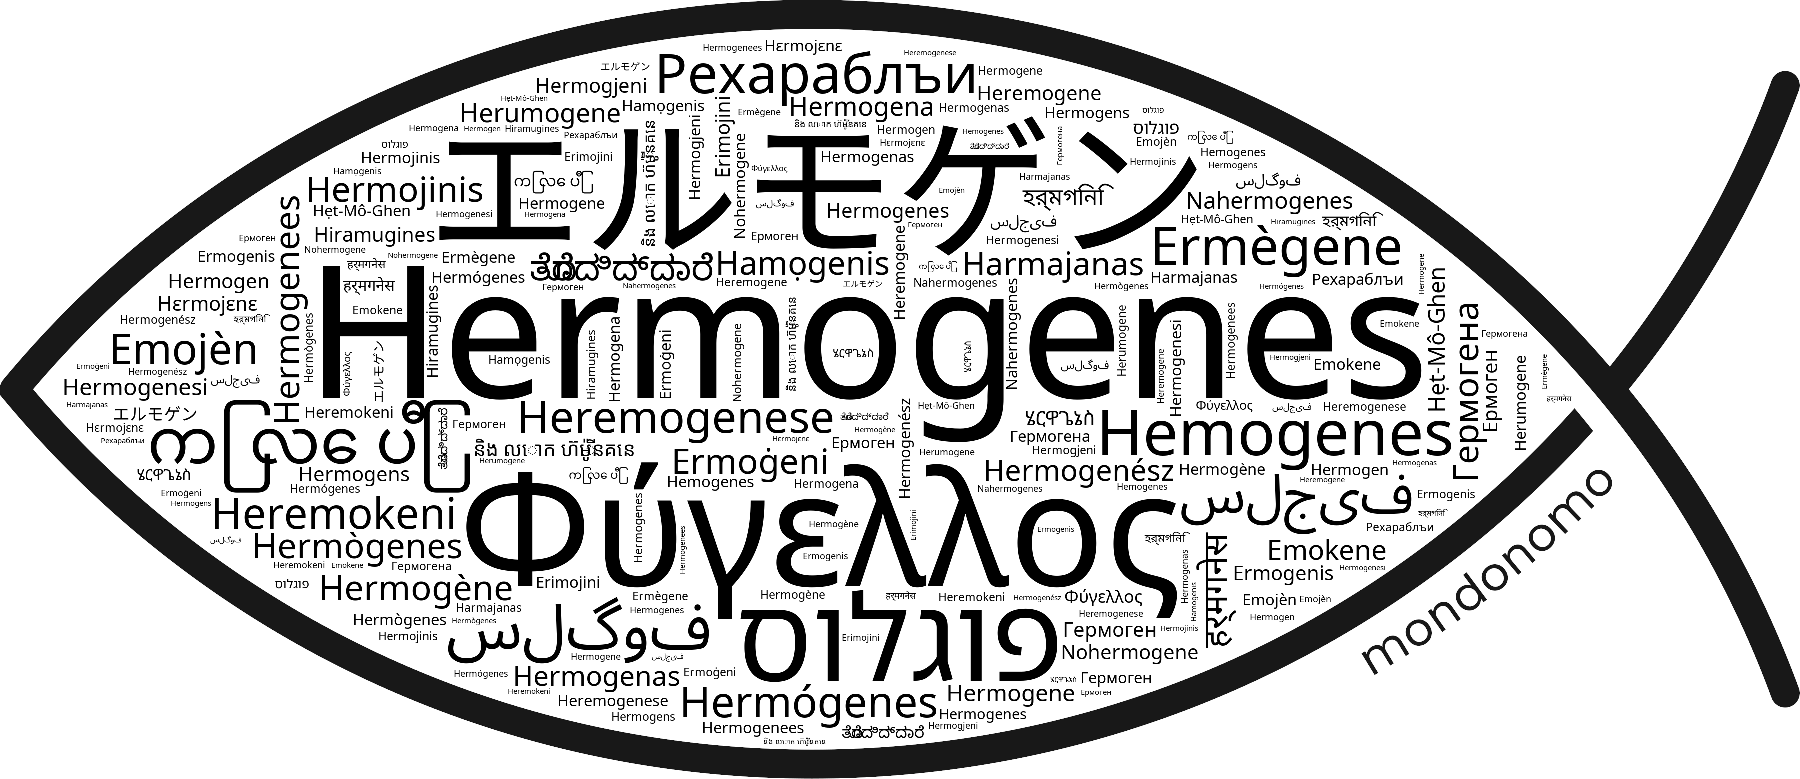 Name Hermogenes in the world's Bibles